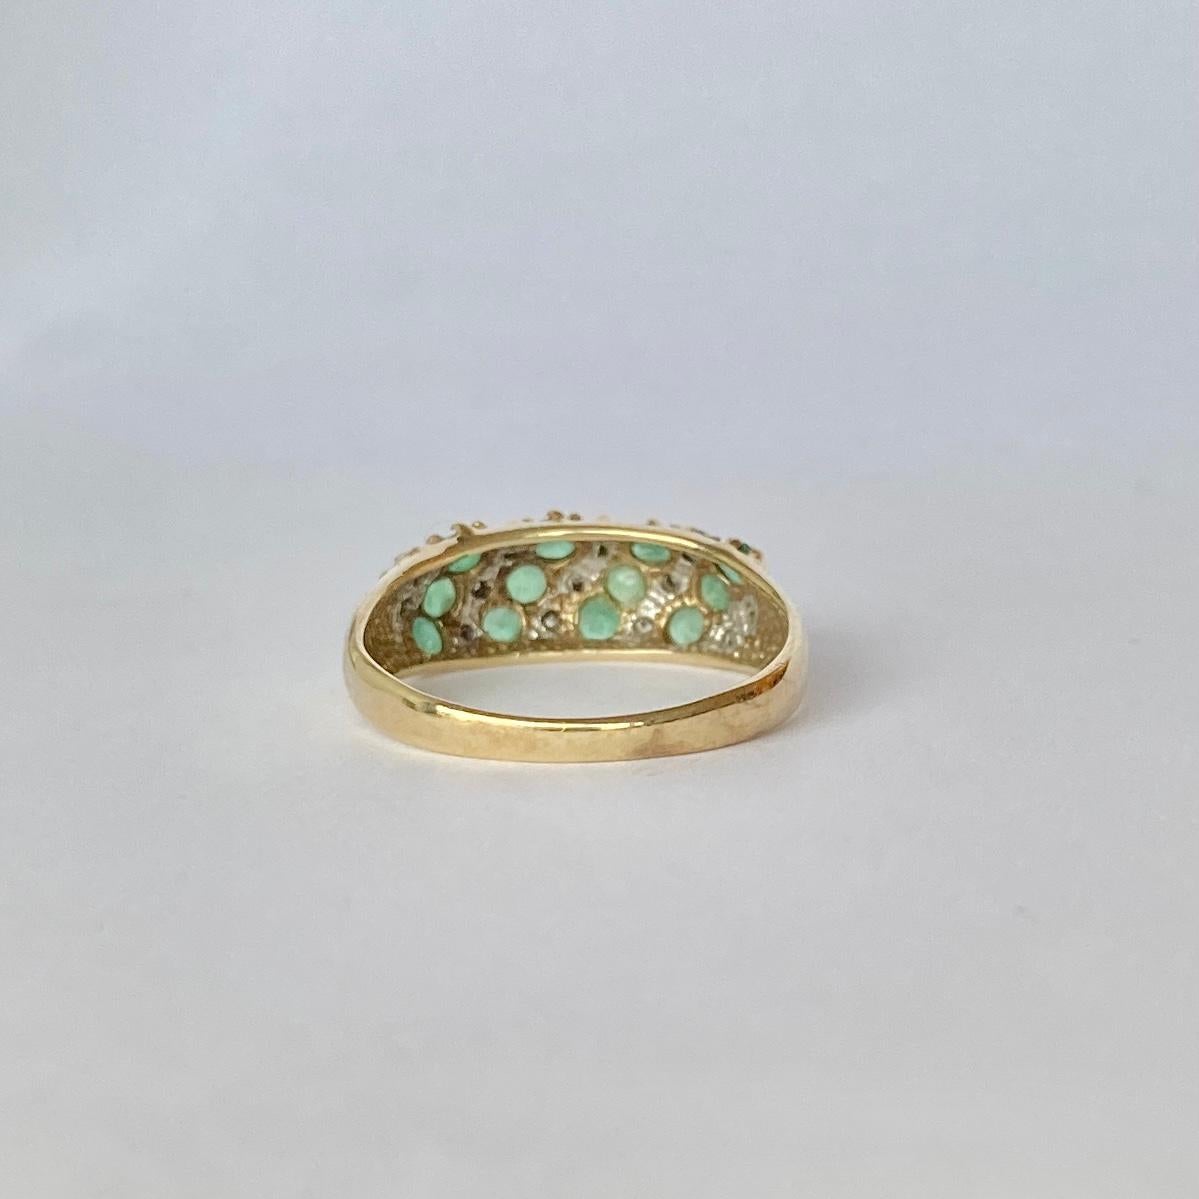 The emeralds in this ring are beautiful and bright and total 60pts. In between the gorgeous green stones are diamond points in rows. The ring is modelled in 9carat gold.

Ring Size: L or 5 3/4
Band Width: 7mm

Weight: 2g